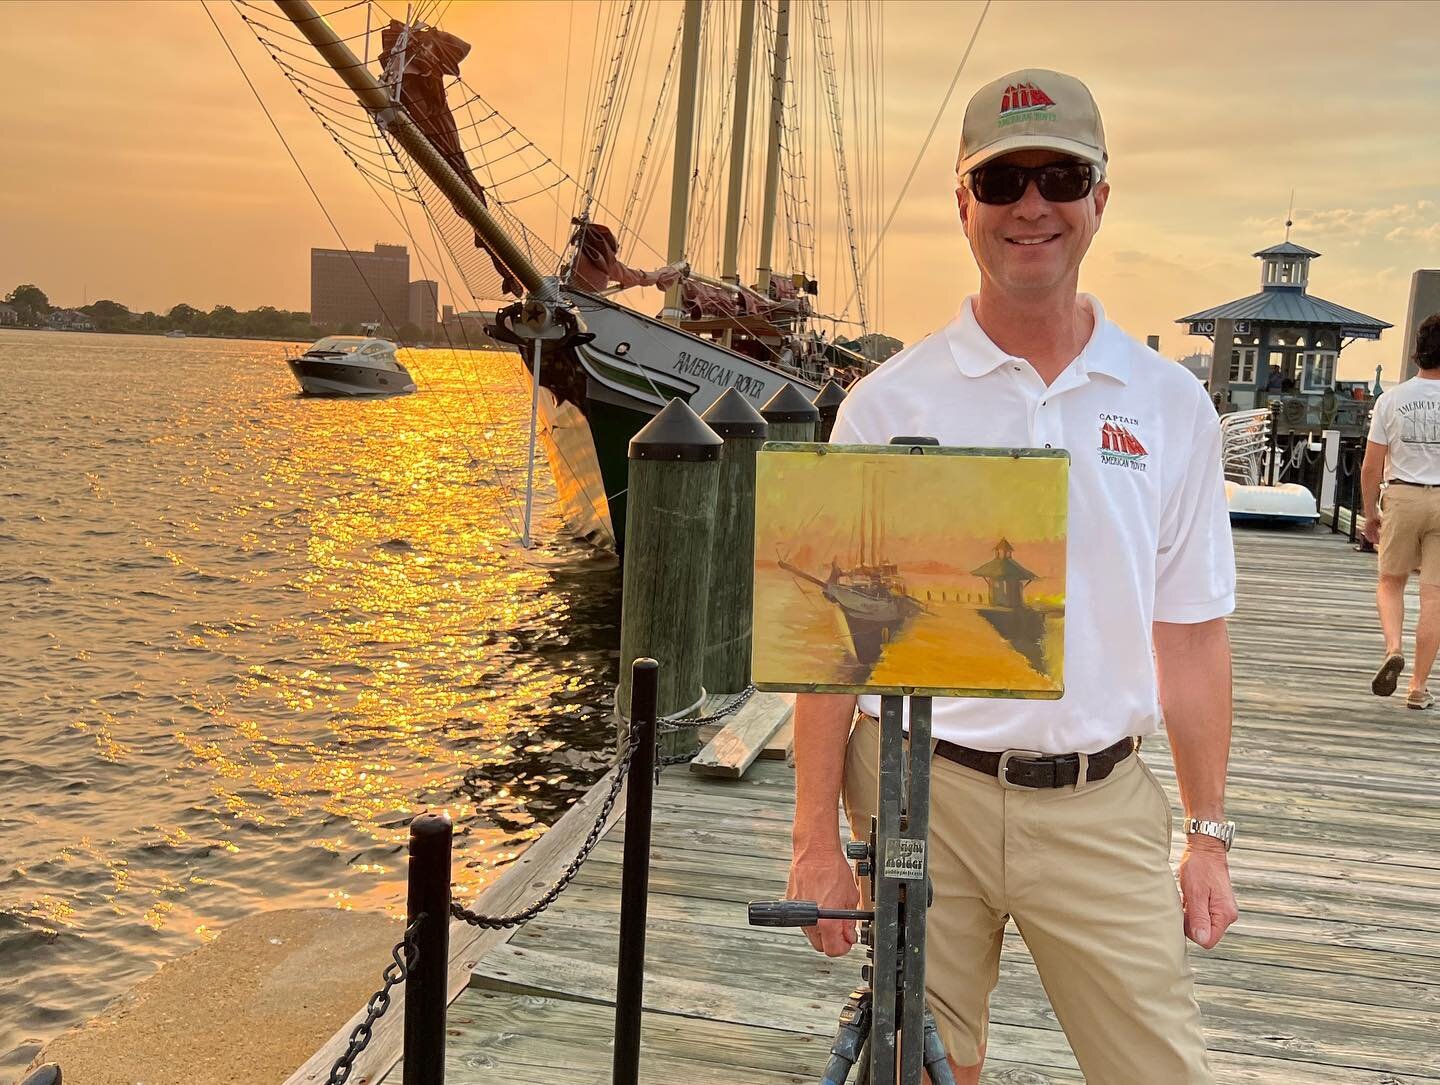 Was pretty busy last night painting! The Captain of the American Rover came over to see the work in progress before they set sail.  Showtime is today and tomorrow for the Coastal VA Plein Air Competition! #oilpainter #pleinair #pleinairpainting #outd